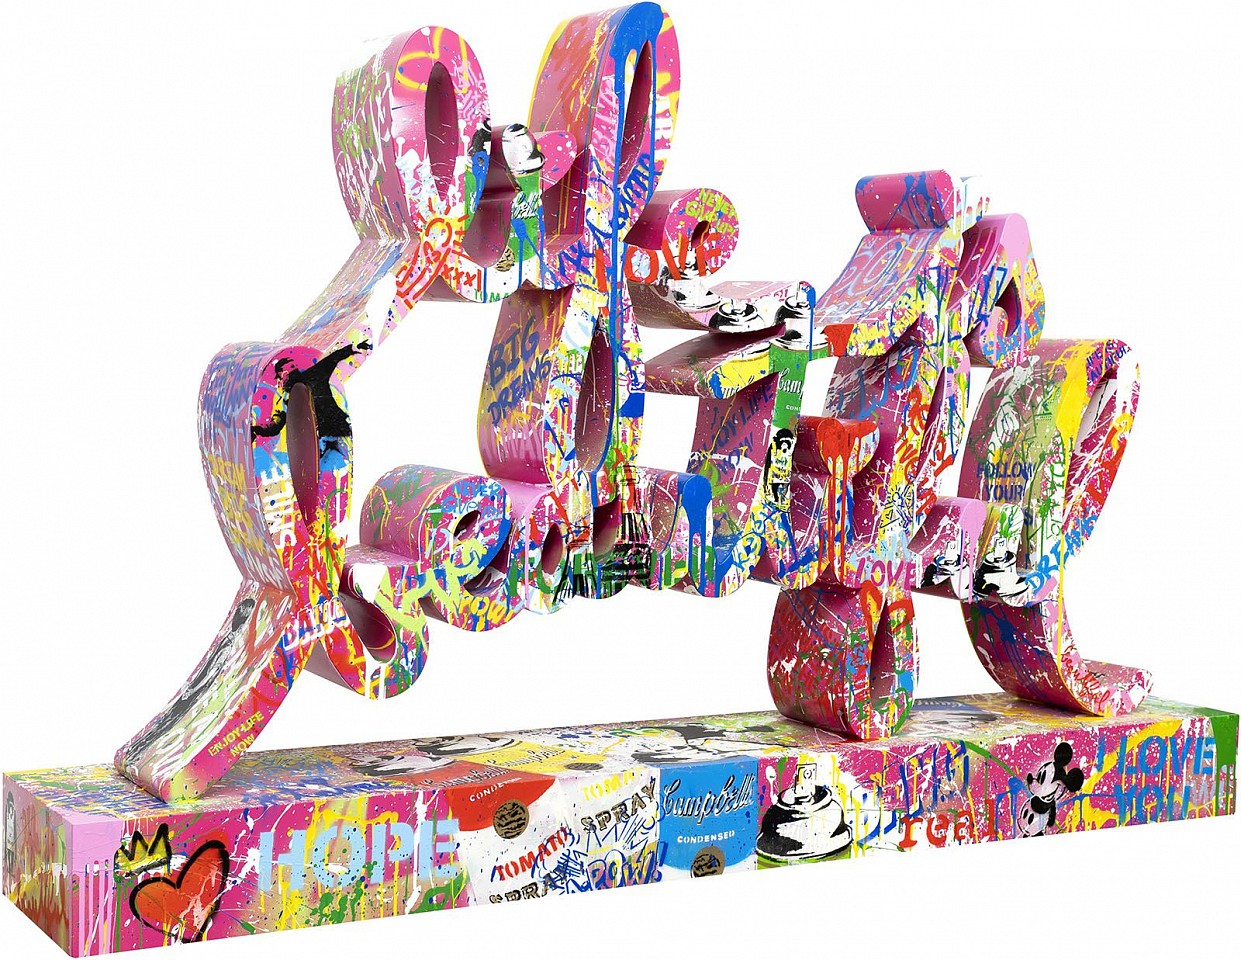 Mr. Brainwash, Life Is Beautiful, 2022
Stencil and Mixed Media on Steel Sculpture, 44 x 70 x 12 in.